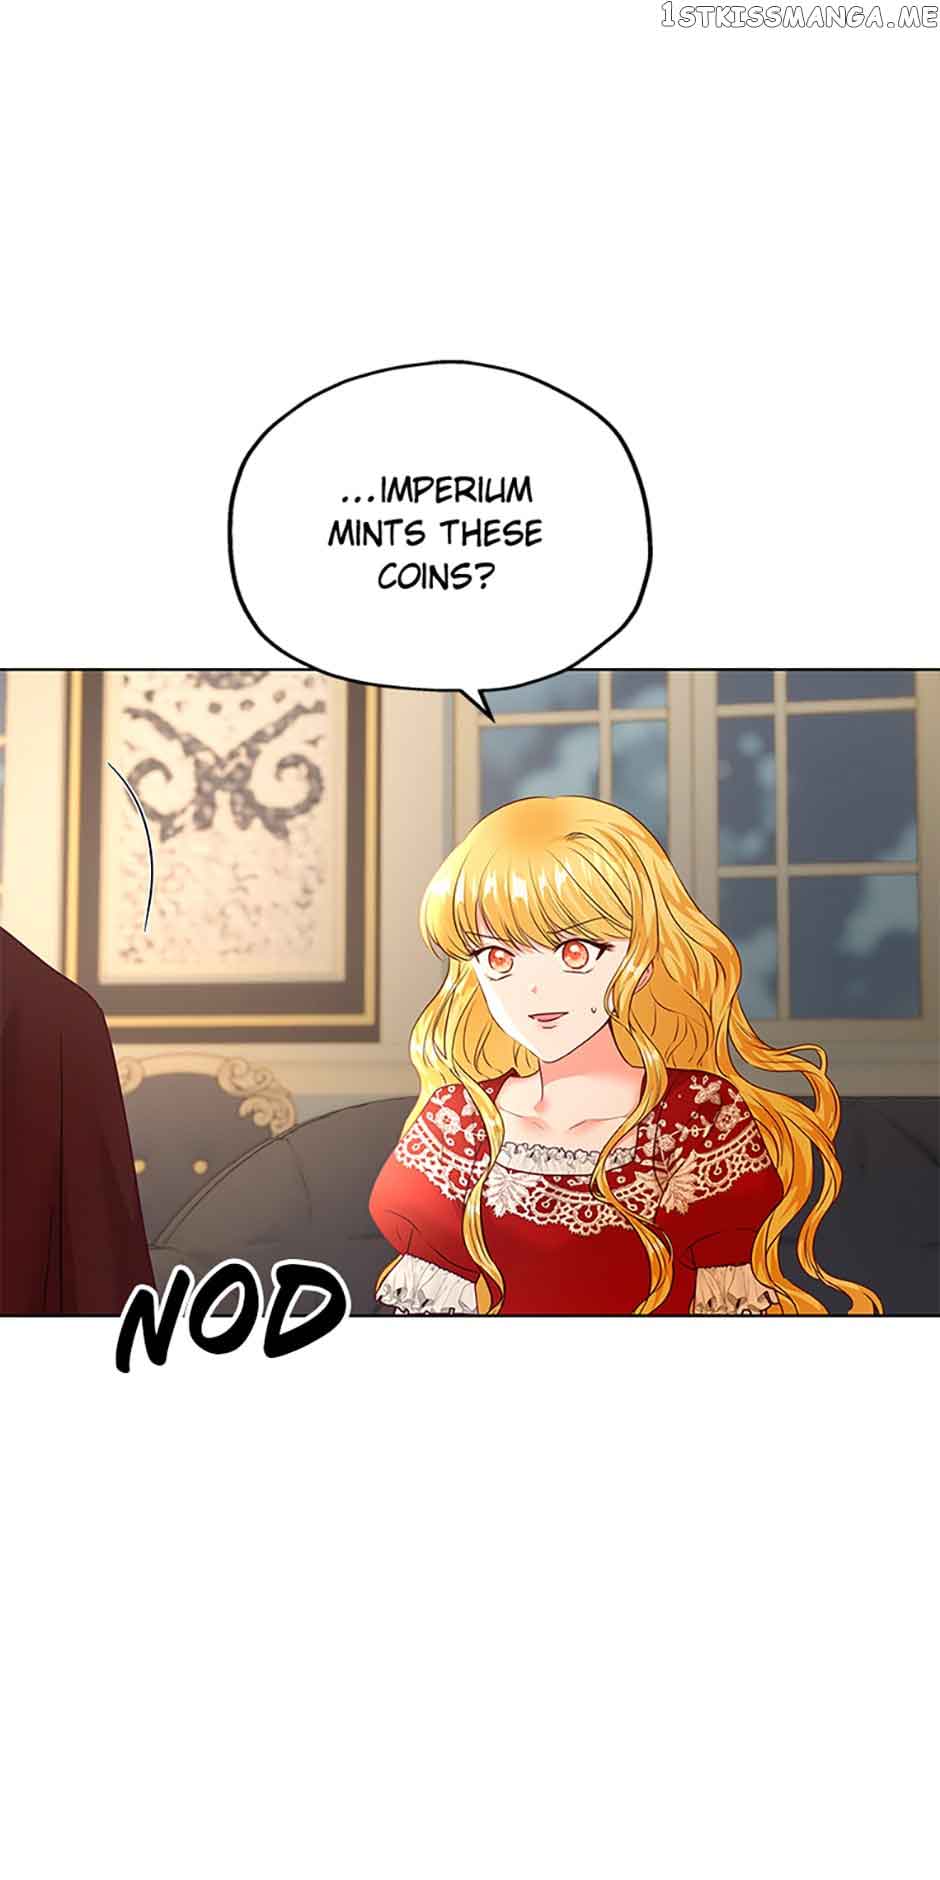 The Crownless Queen chapter 32